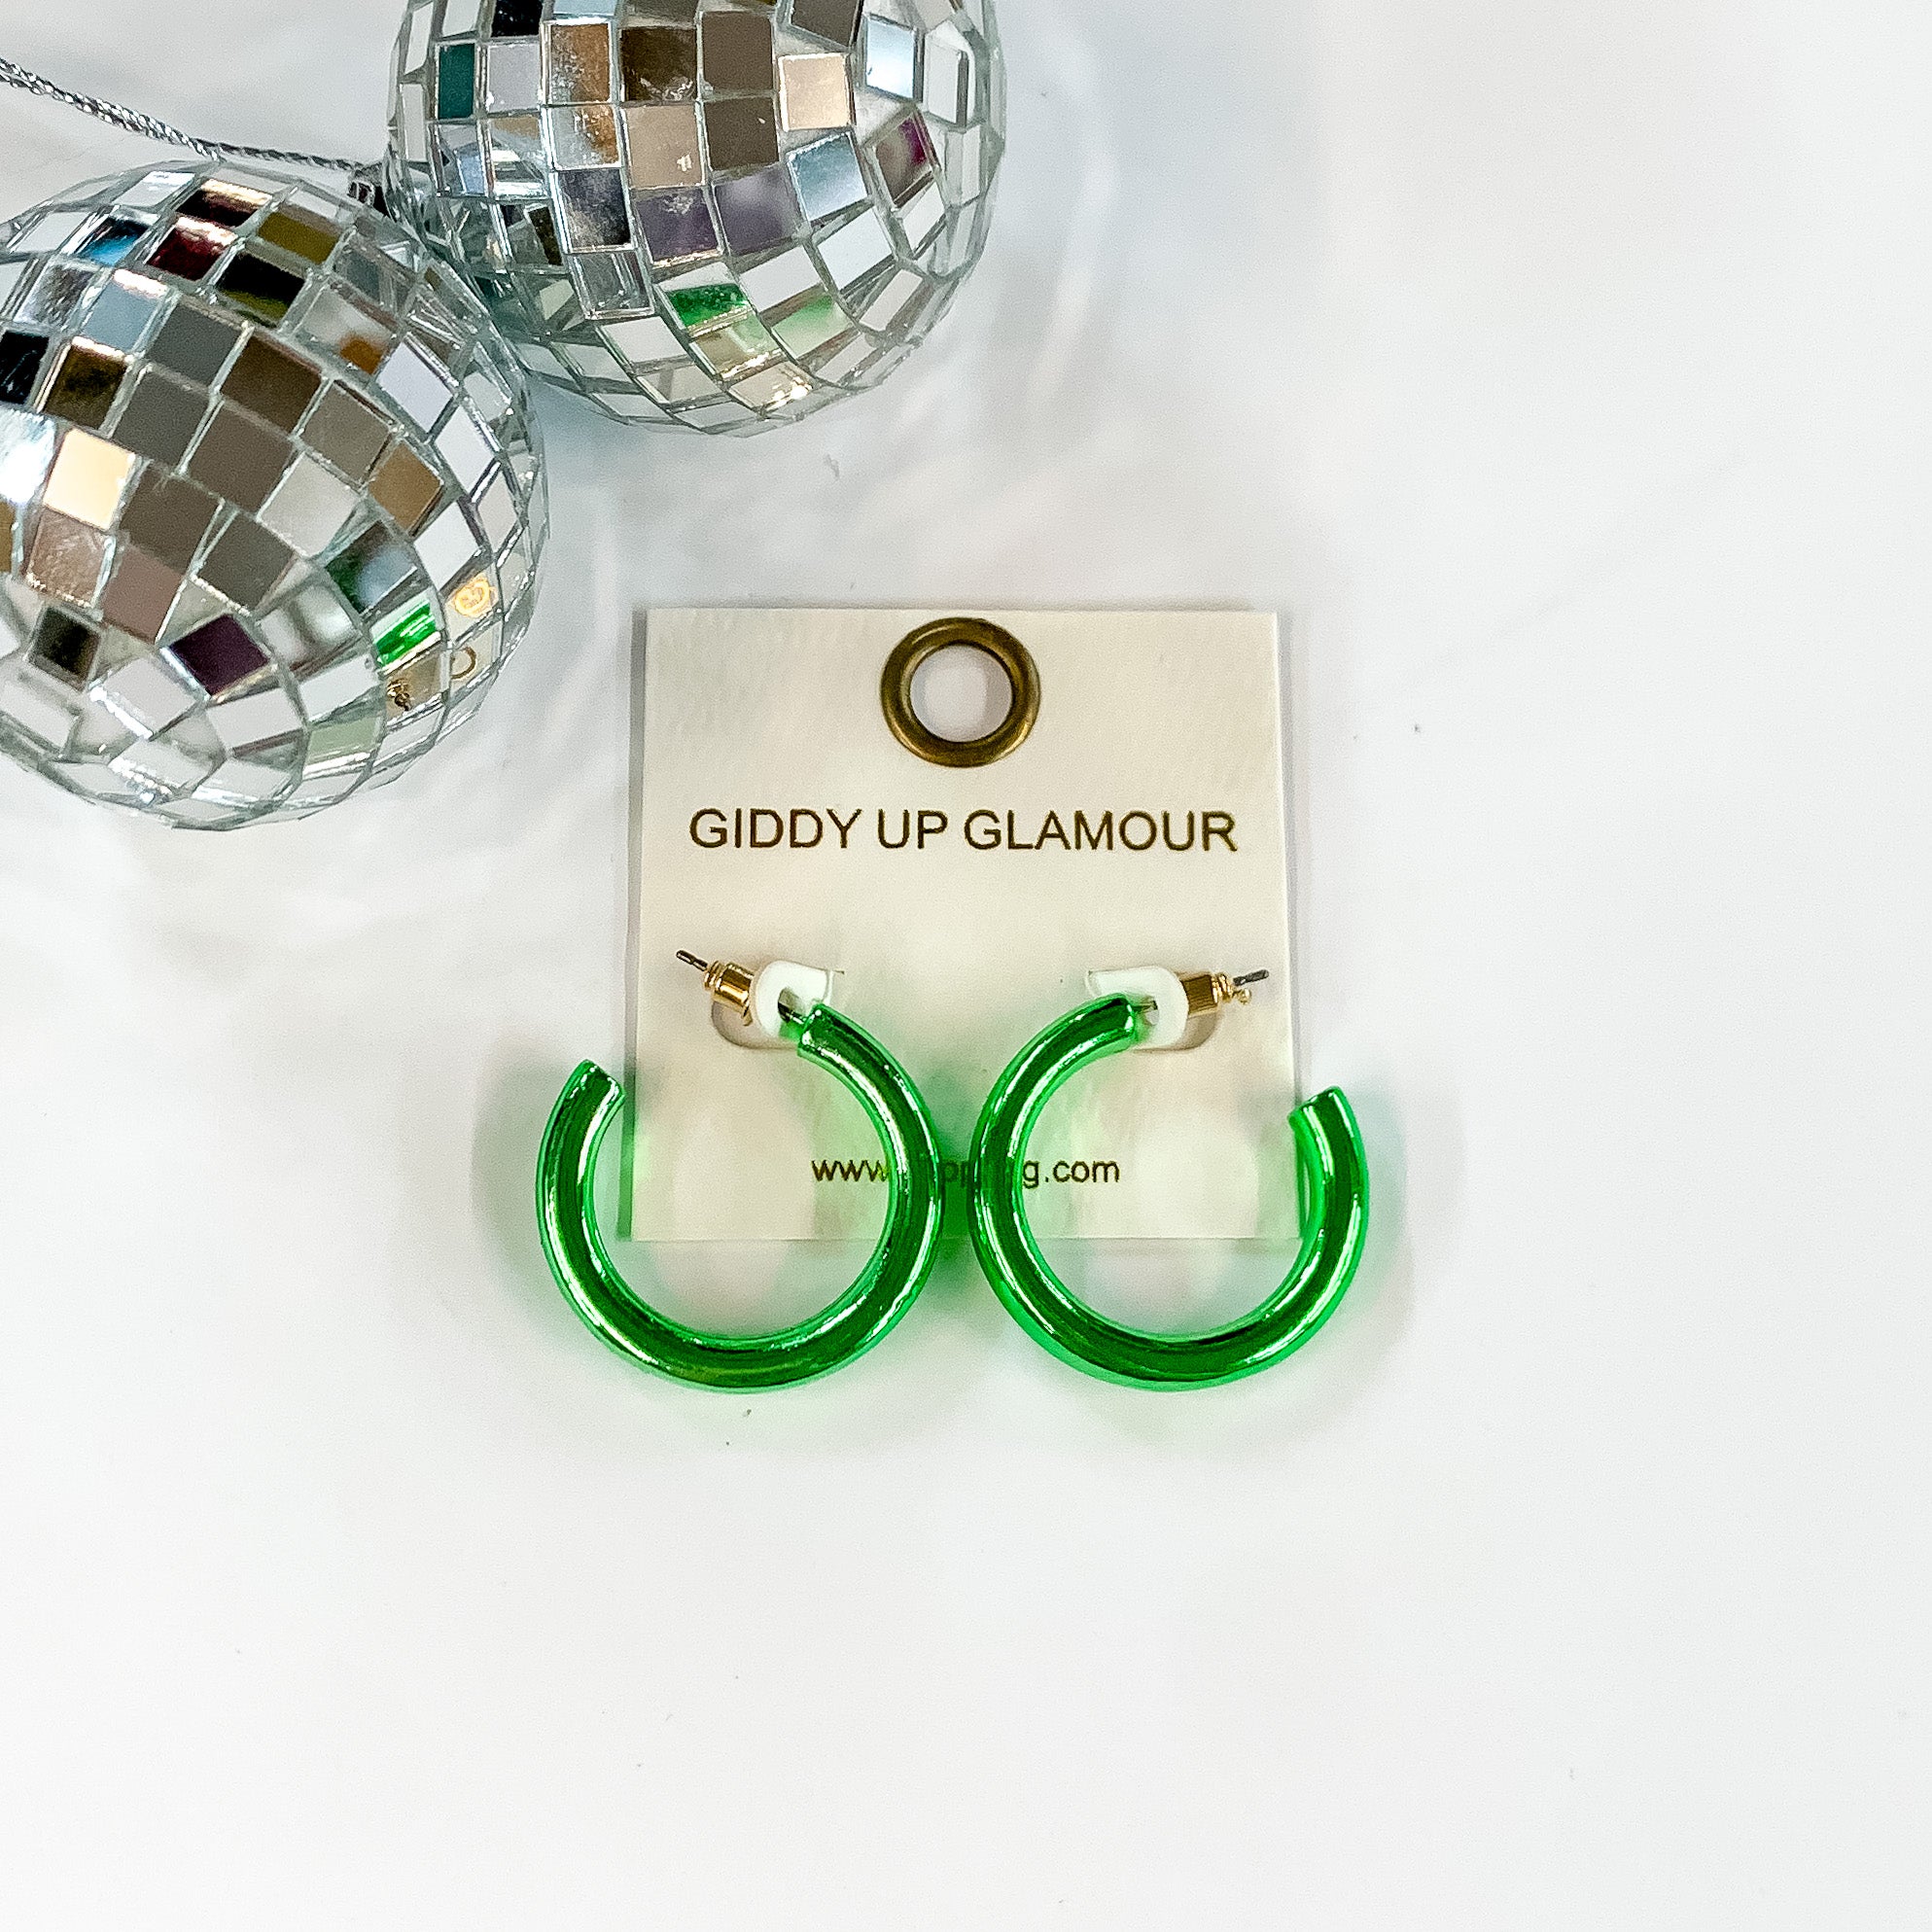 Light Up Small Neon Hoop Earrings In Green. Pictured on a white background with disco balls in the top left corner.